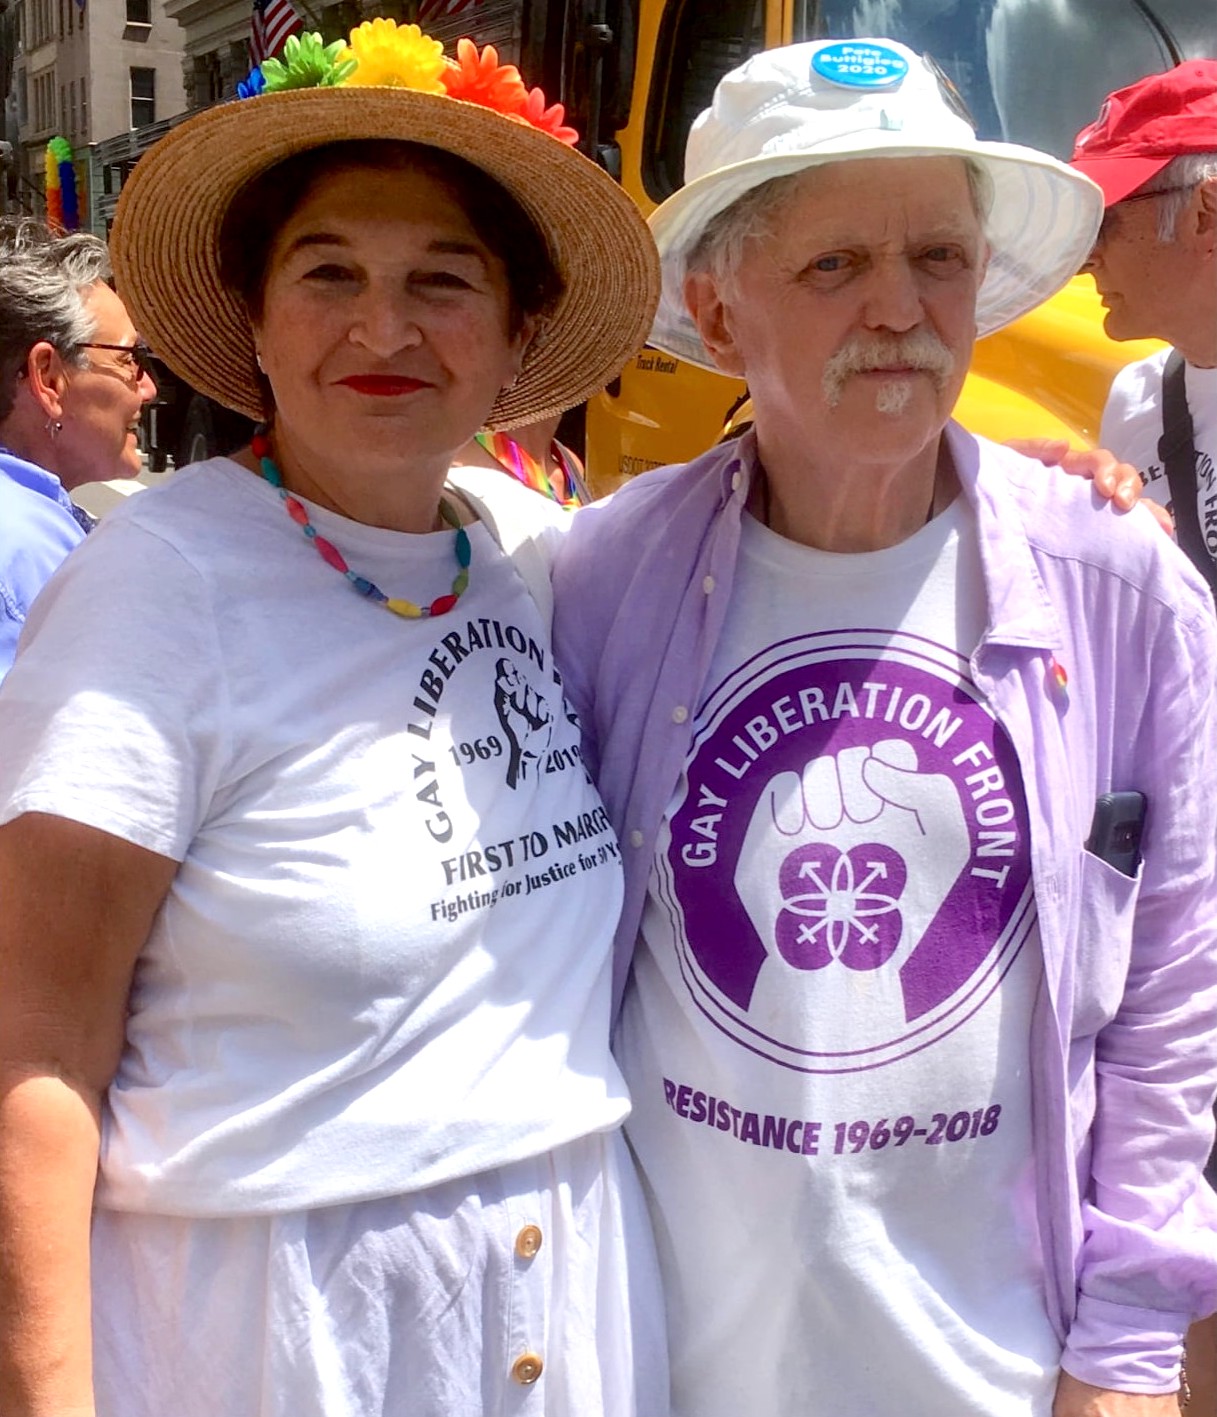 Michela Griffo and Jim Fourratt at the Gay Pride March, June 2019. Michela shares, “I’ve known Jim since I was 19.” Photo courtesy of Michela Griffo.